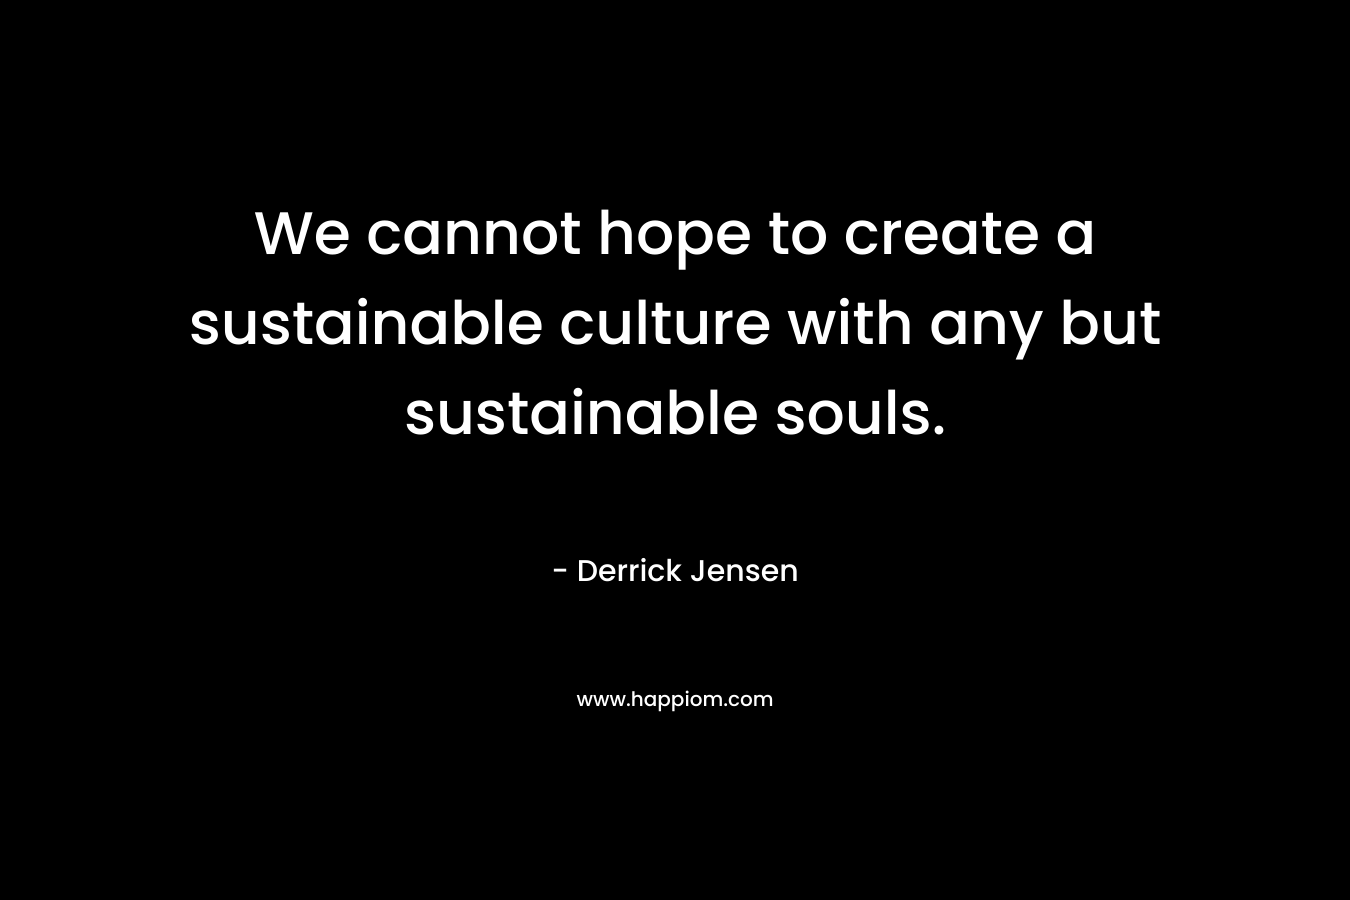 We cannot hope to create a sustainable culture with any but sustainable souls.